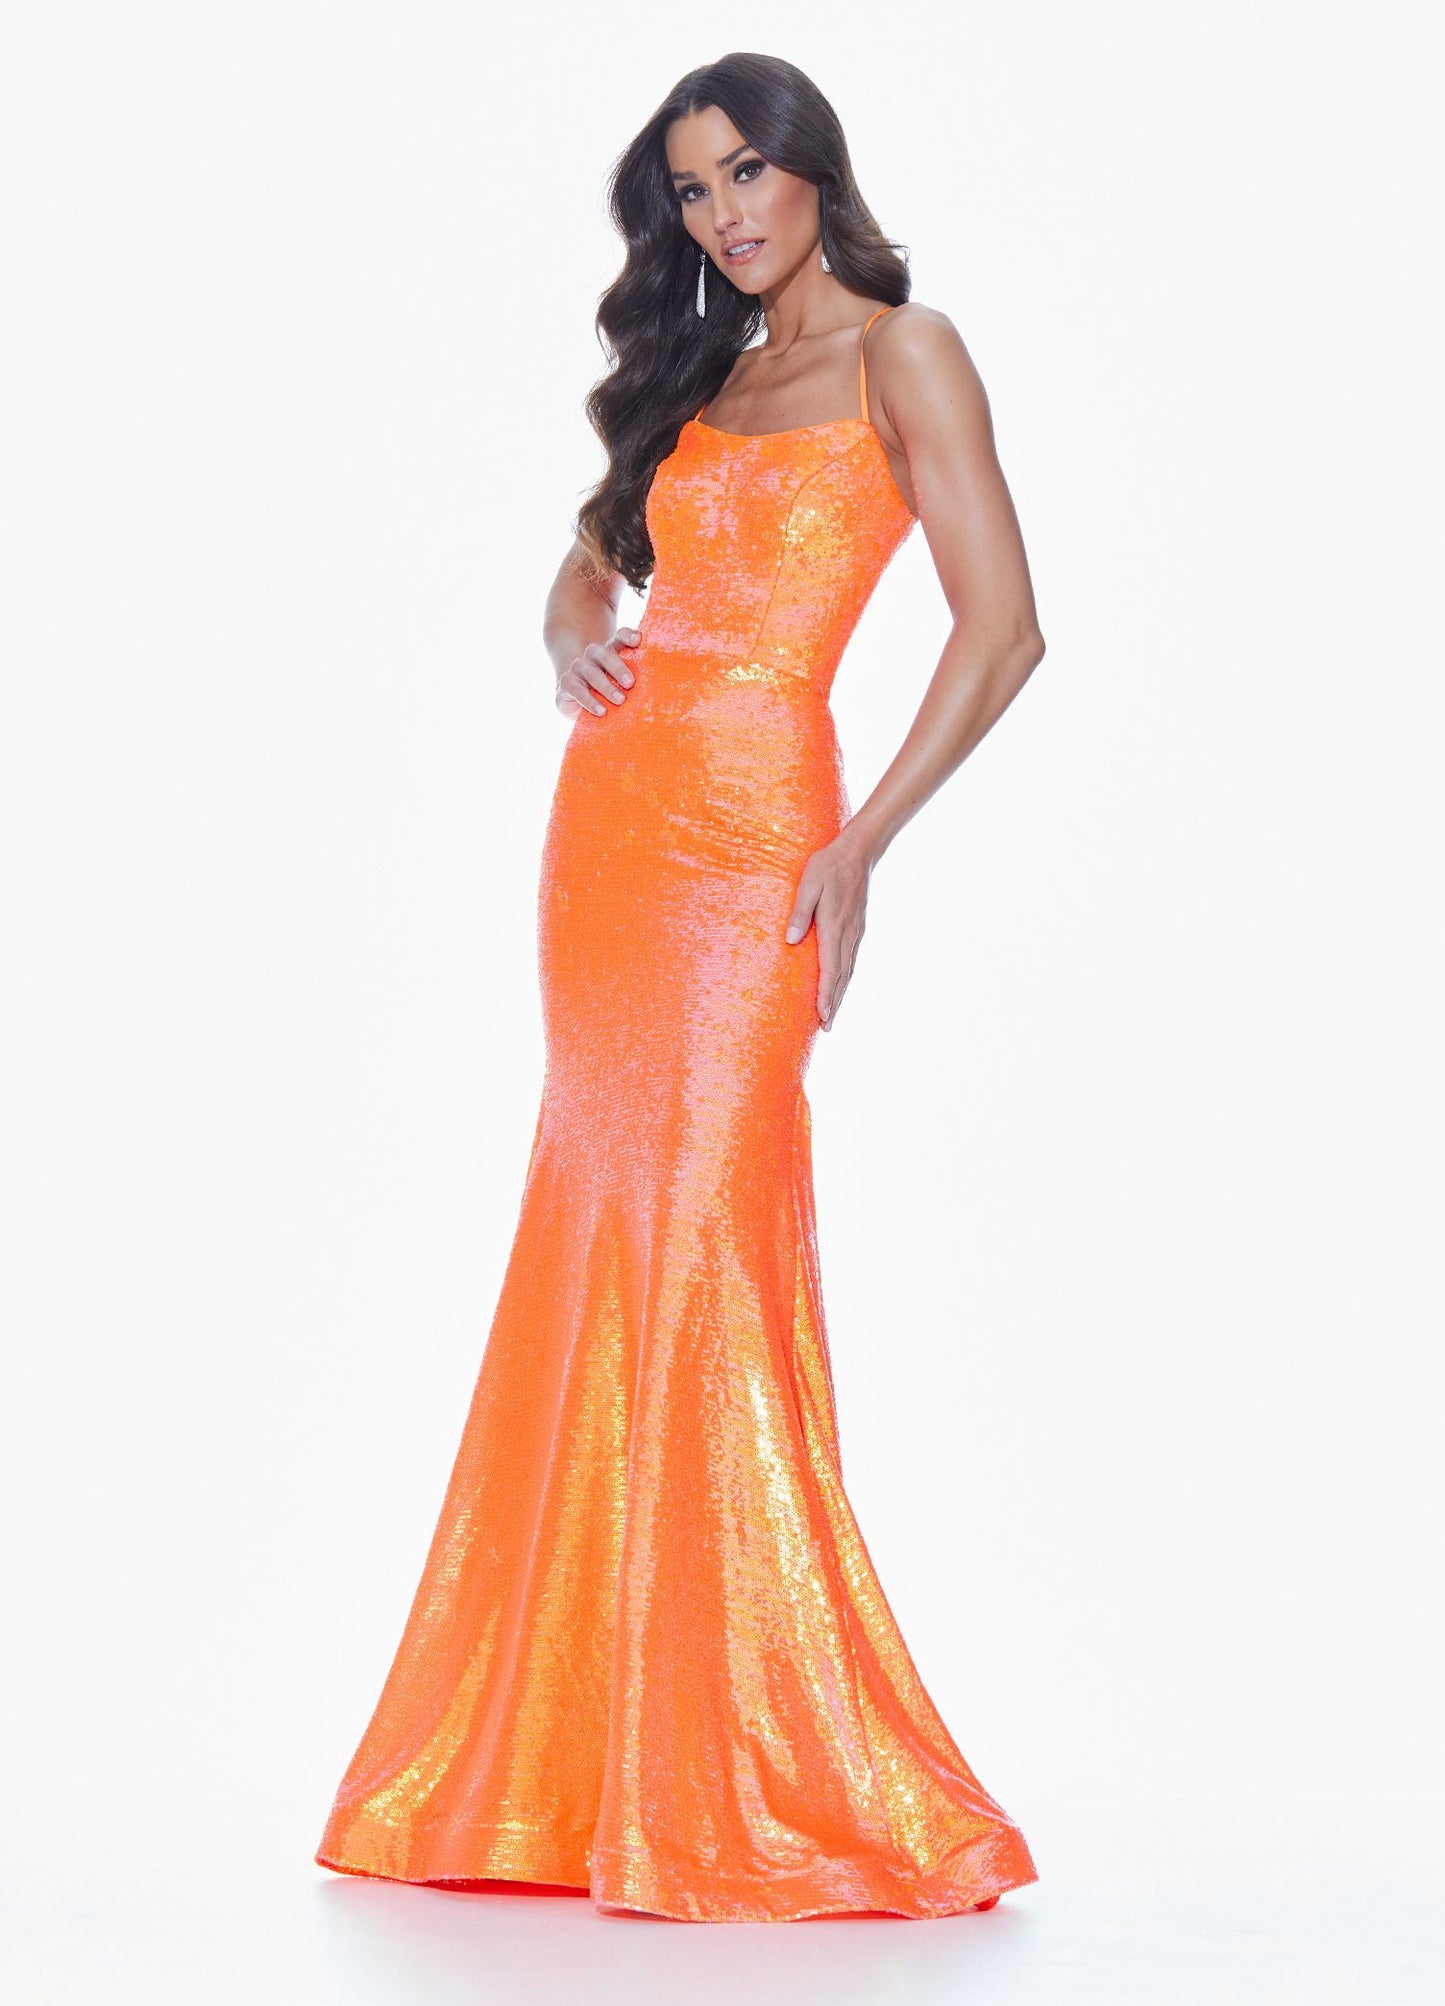 Ashley Lauren 11024 Coral Size 4 Sequin Prom Dress with Lace Up Back Pageant Gown